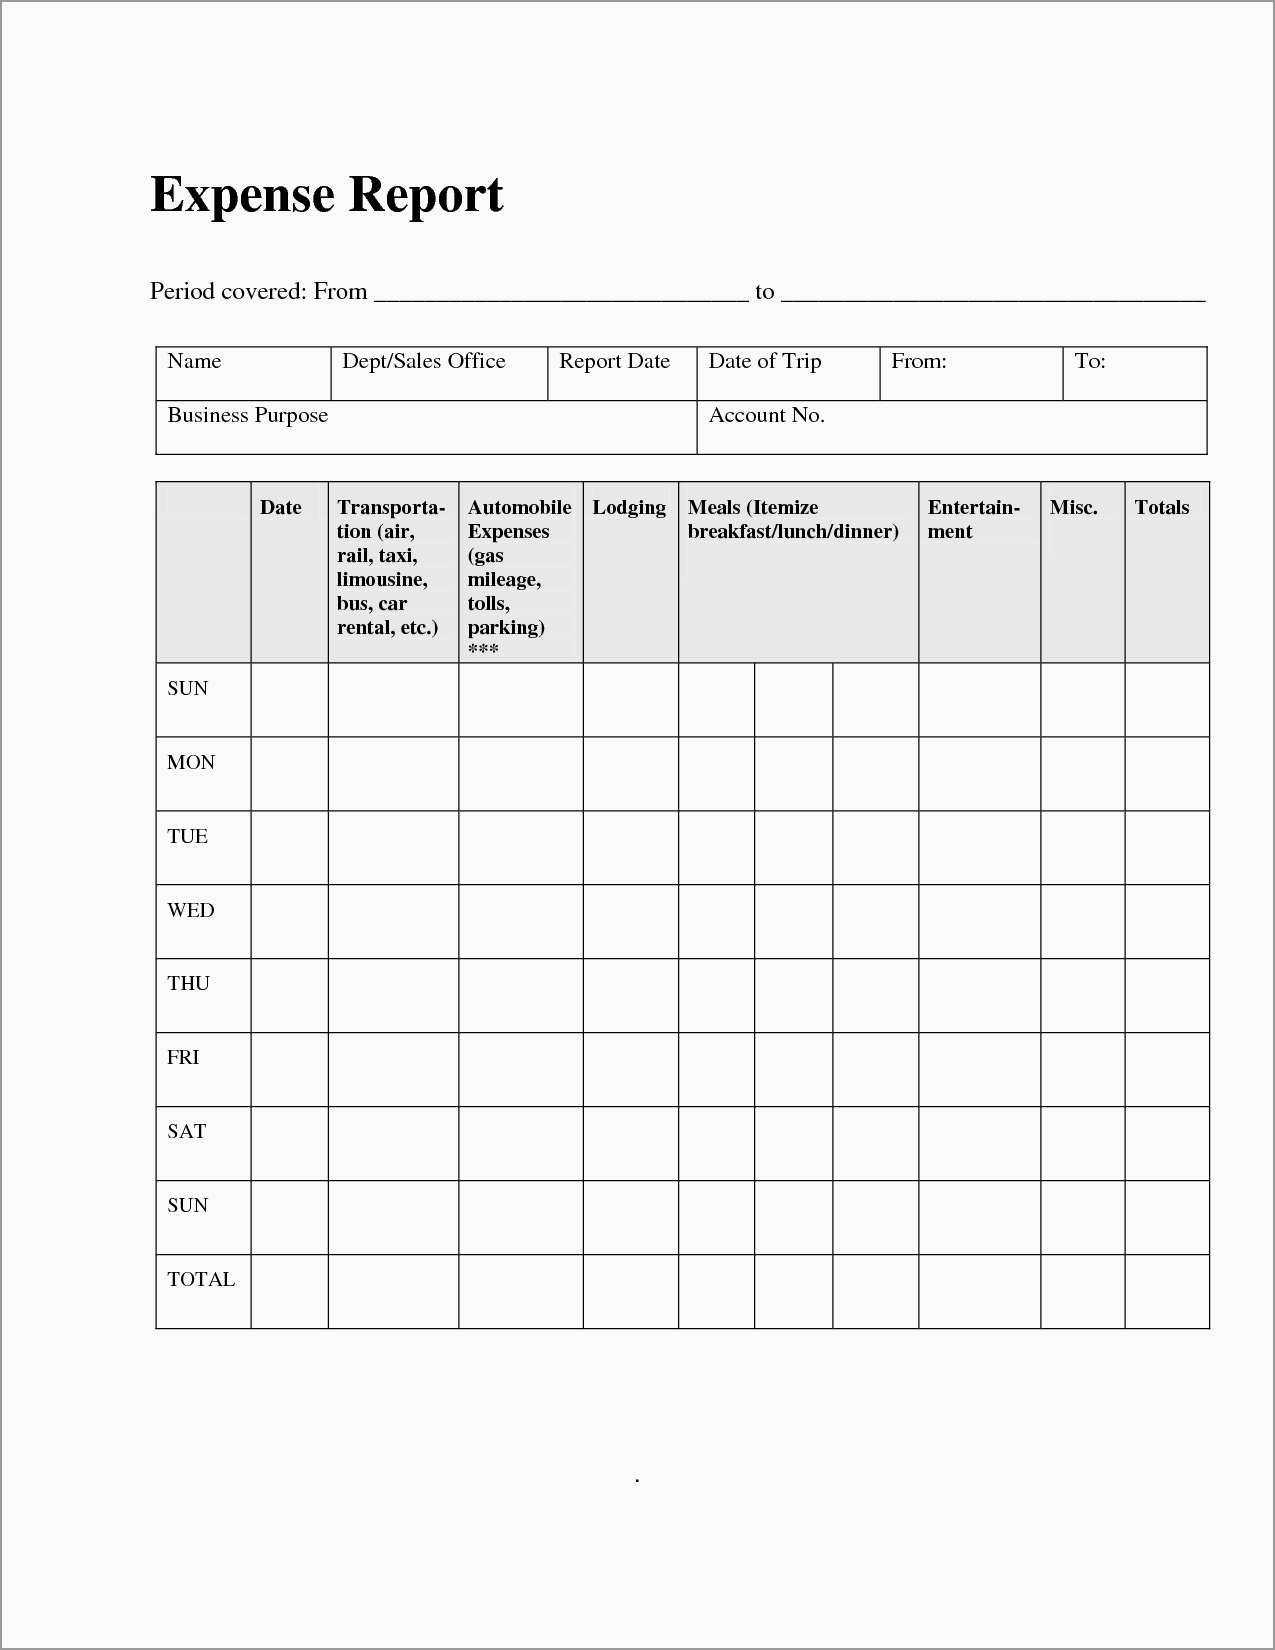 Expense Report Template For Mac Numbers Travel Excel 2007 Regarding Gas Mileage Expense Report Template